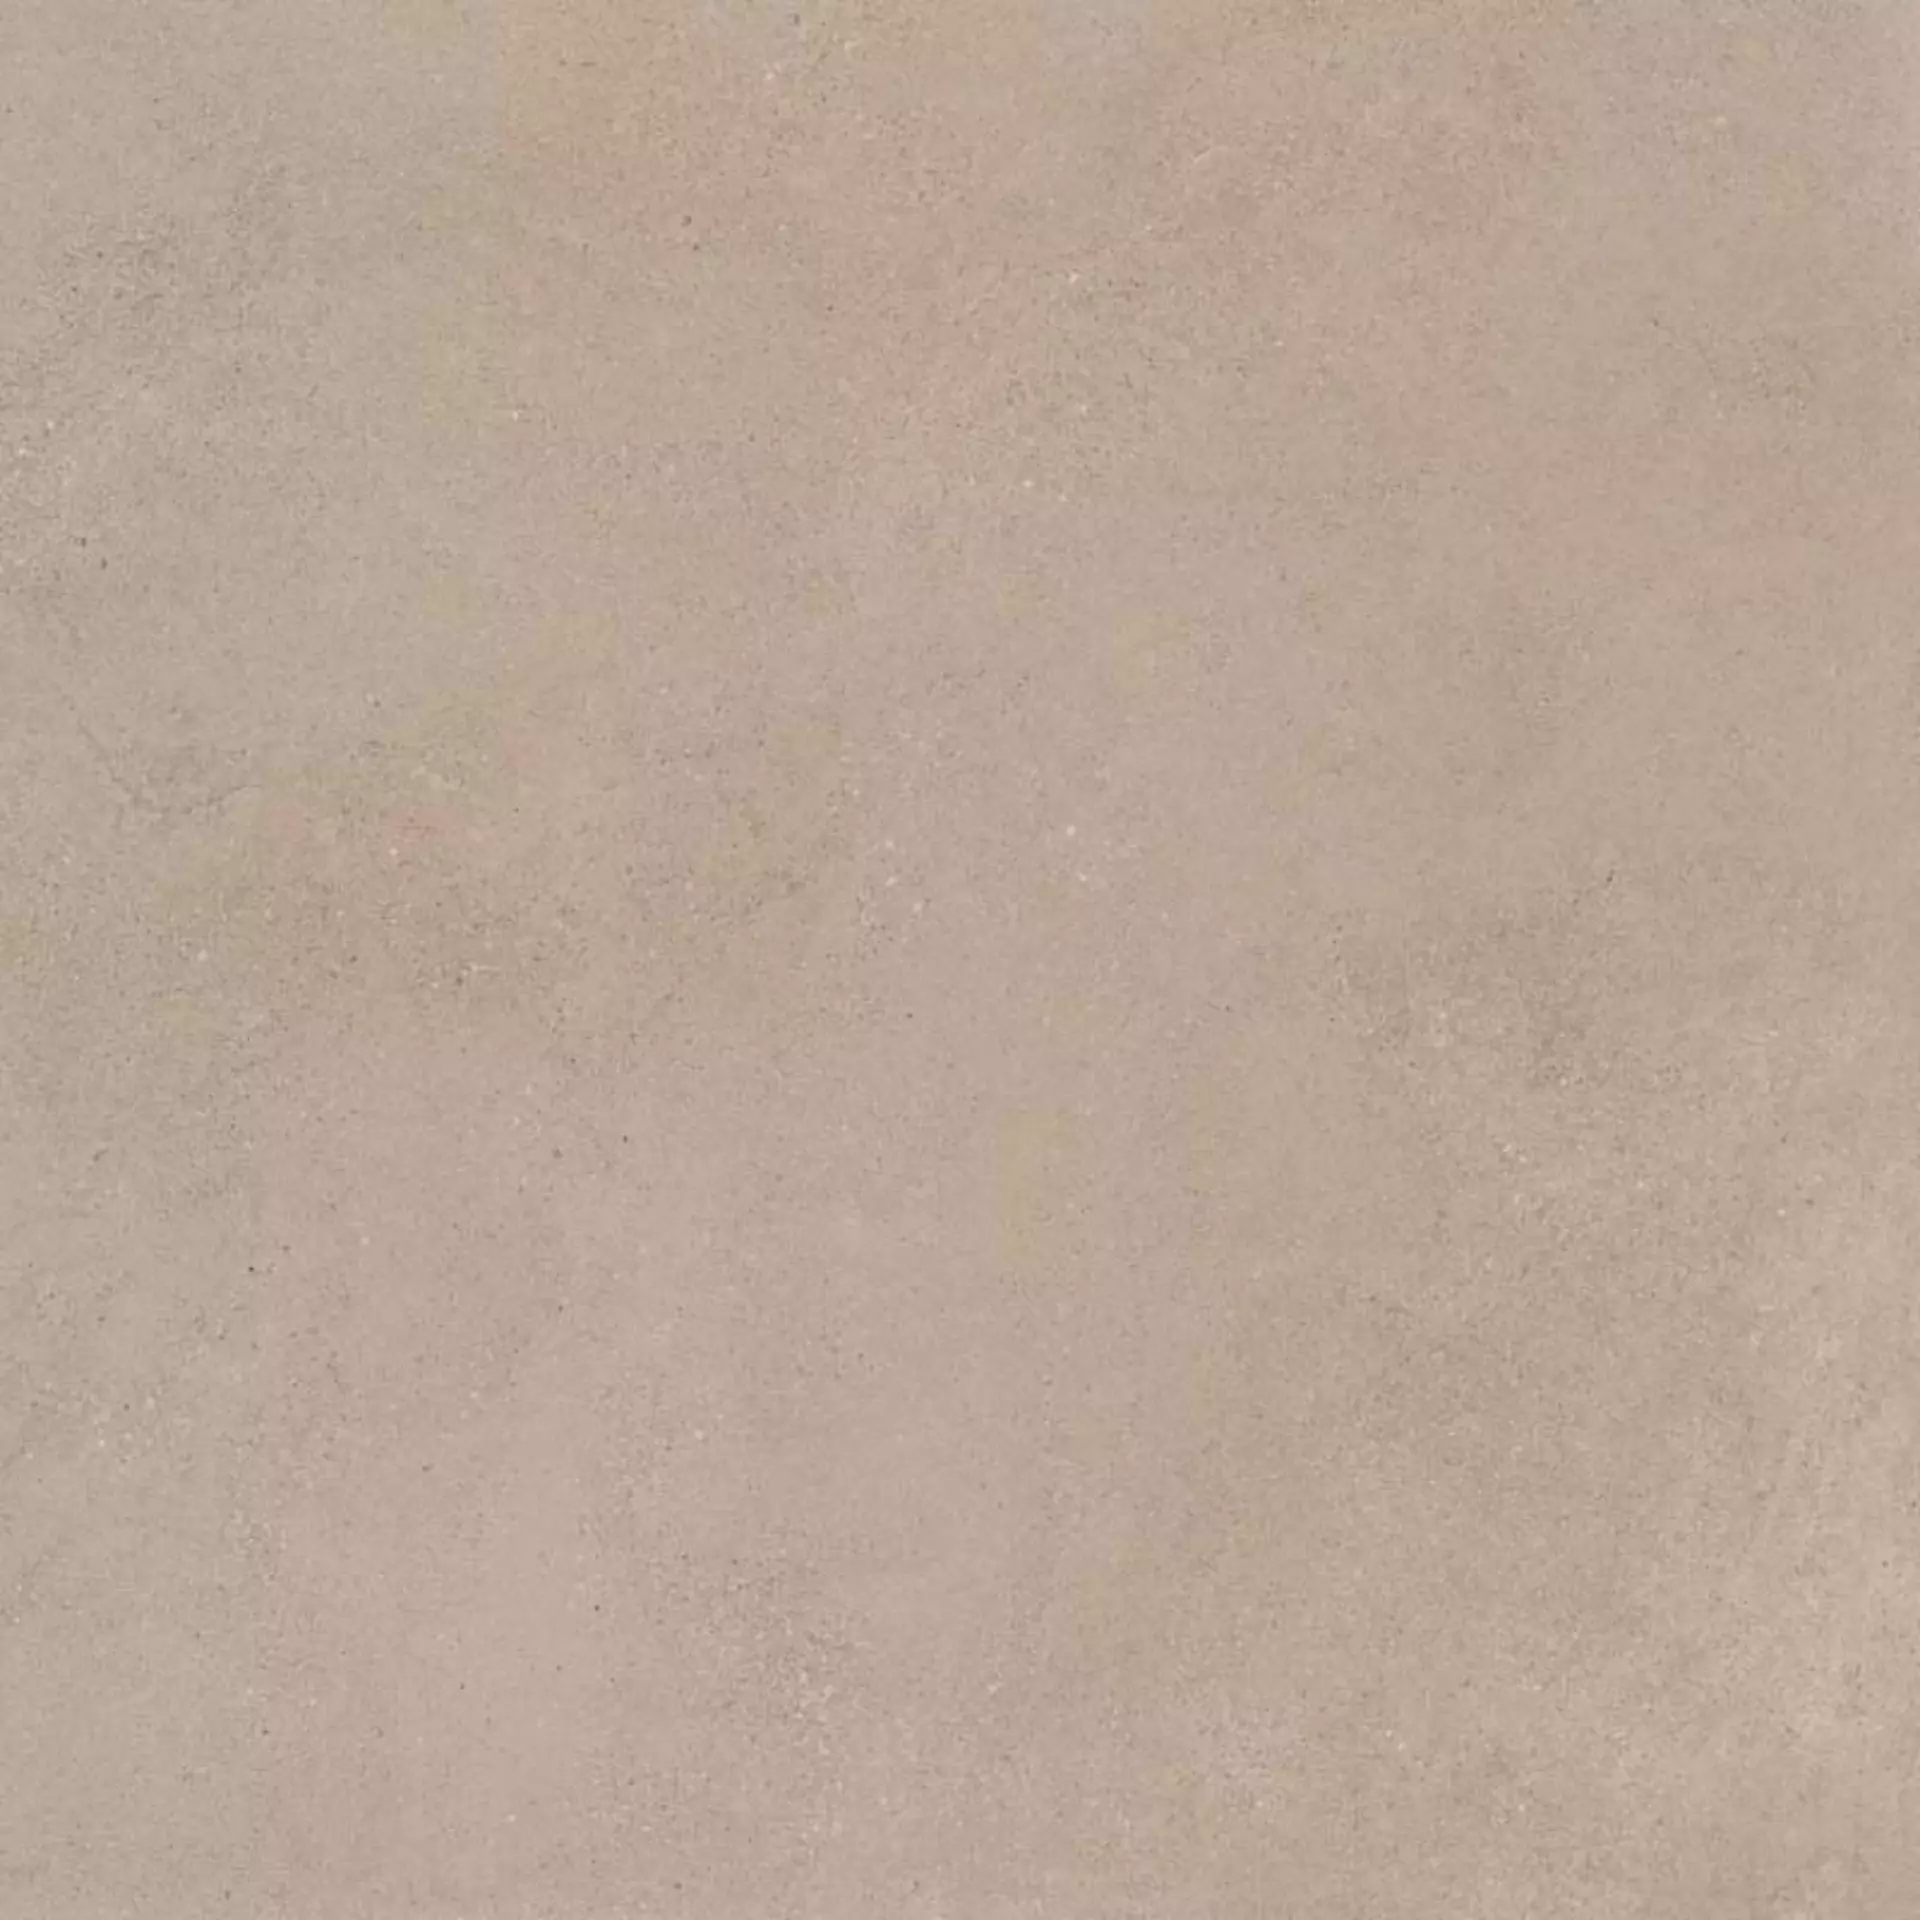 Sant Agostino Silkystone Taupe Natural CSASKSTA90 90x90cm rectified 10mm